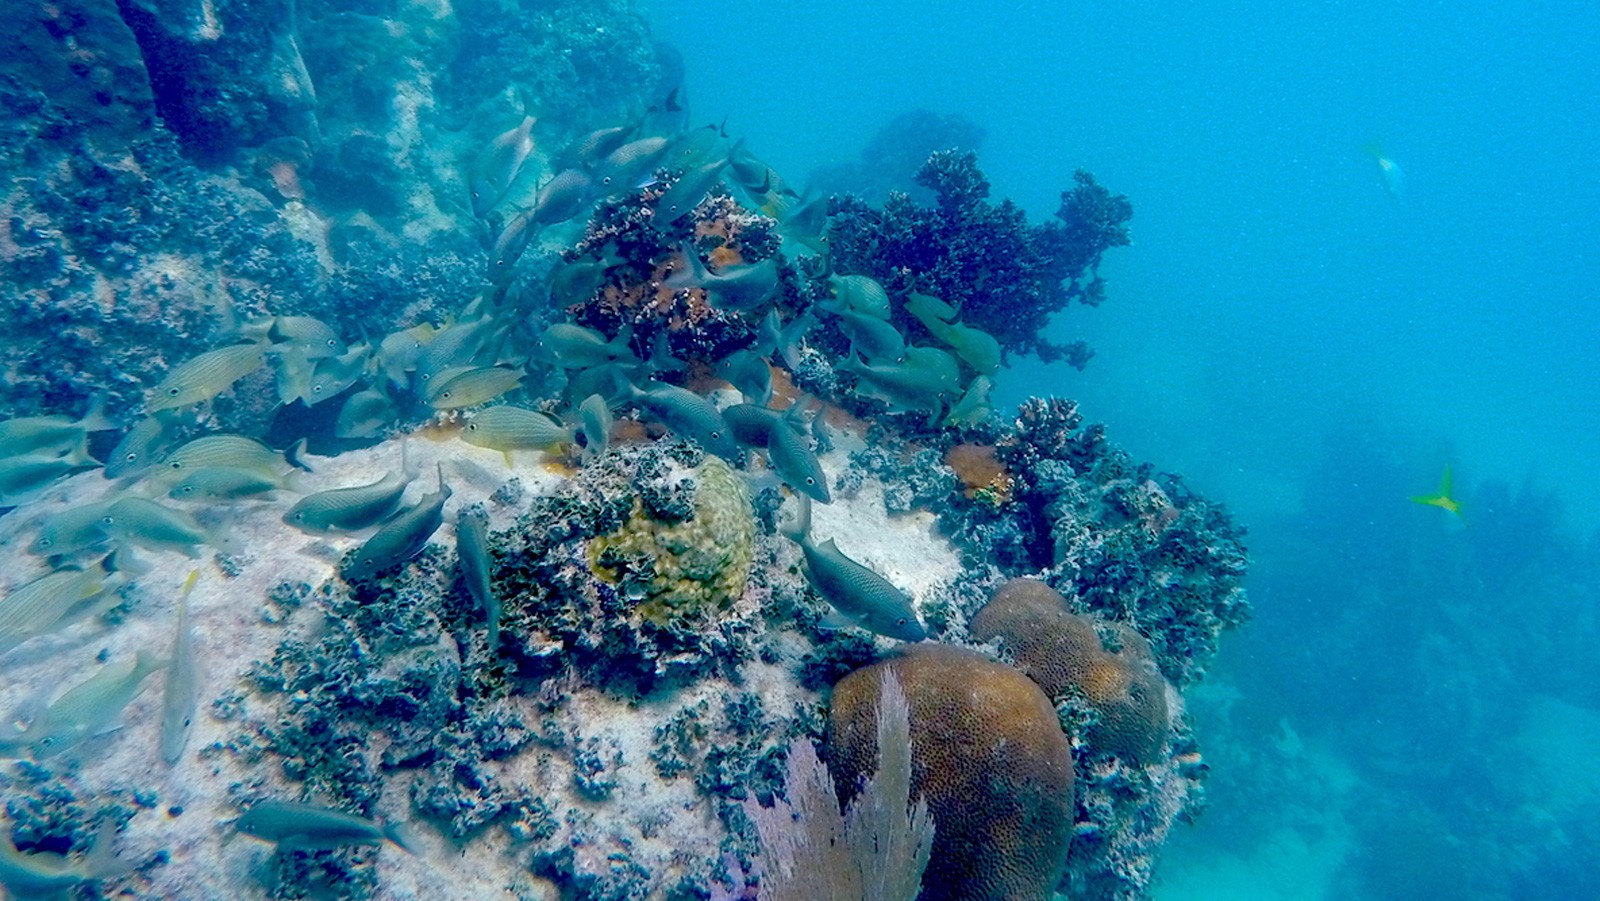 Healthy coral and reef fish along the dive site. Image credit: NOAA